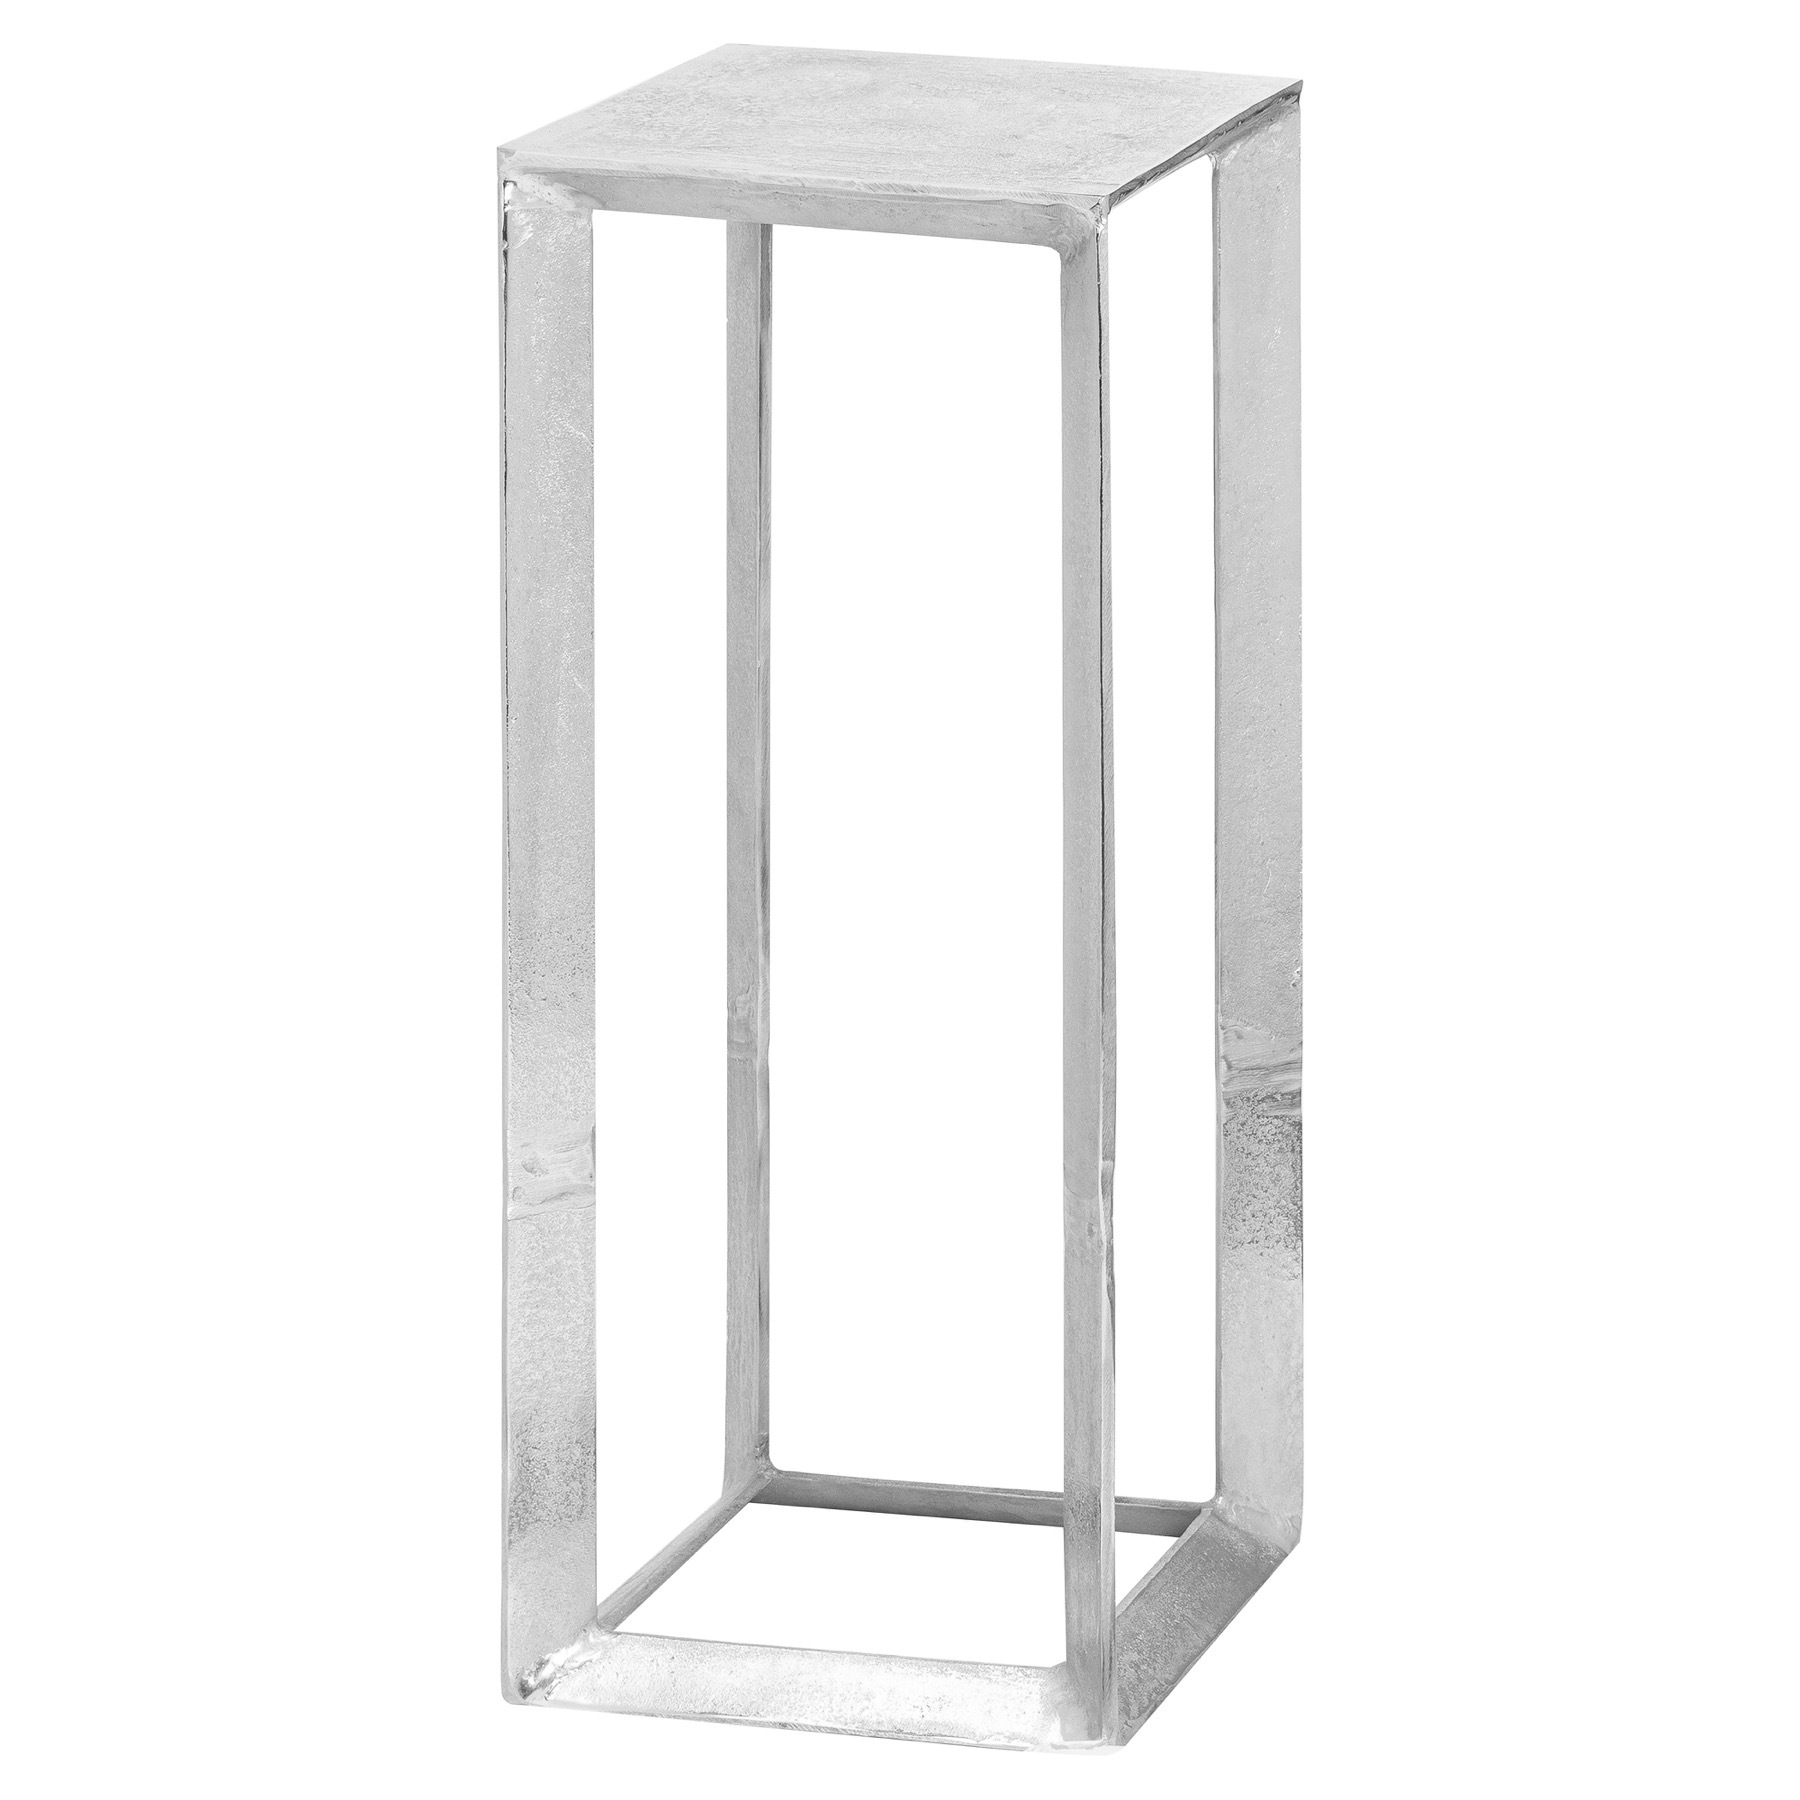 Farrah Collection Medium Silver Plant Stand - Image 1